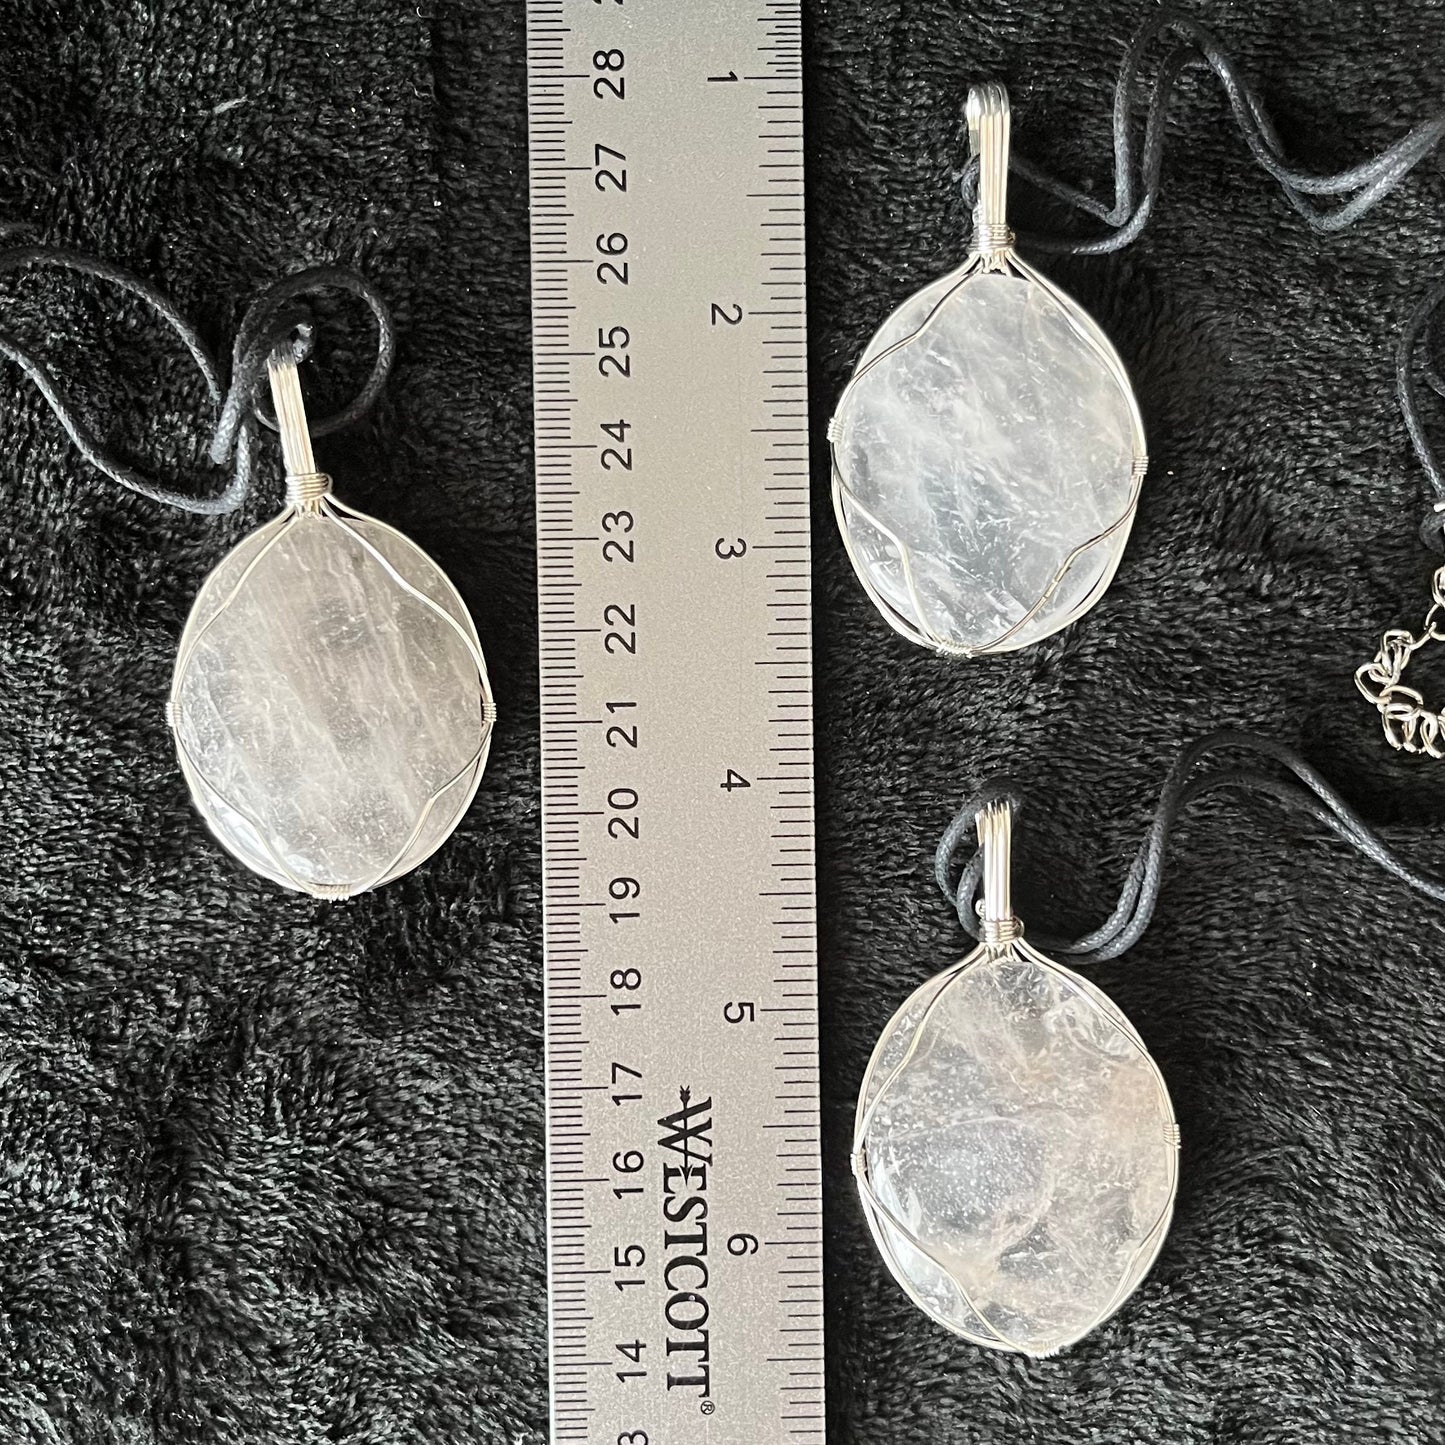 3 clear quartz worry stones beautifully silver wire wrapped in a way that frames the stone beautifully allowing access to the smoothe concave side on the back.  pe dants are approximately 2 inches long and attatched to adjustable black cords. displayed next to a ruler